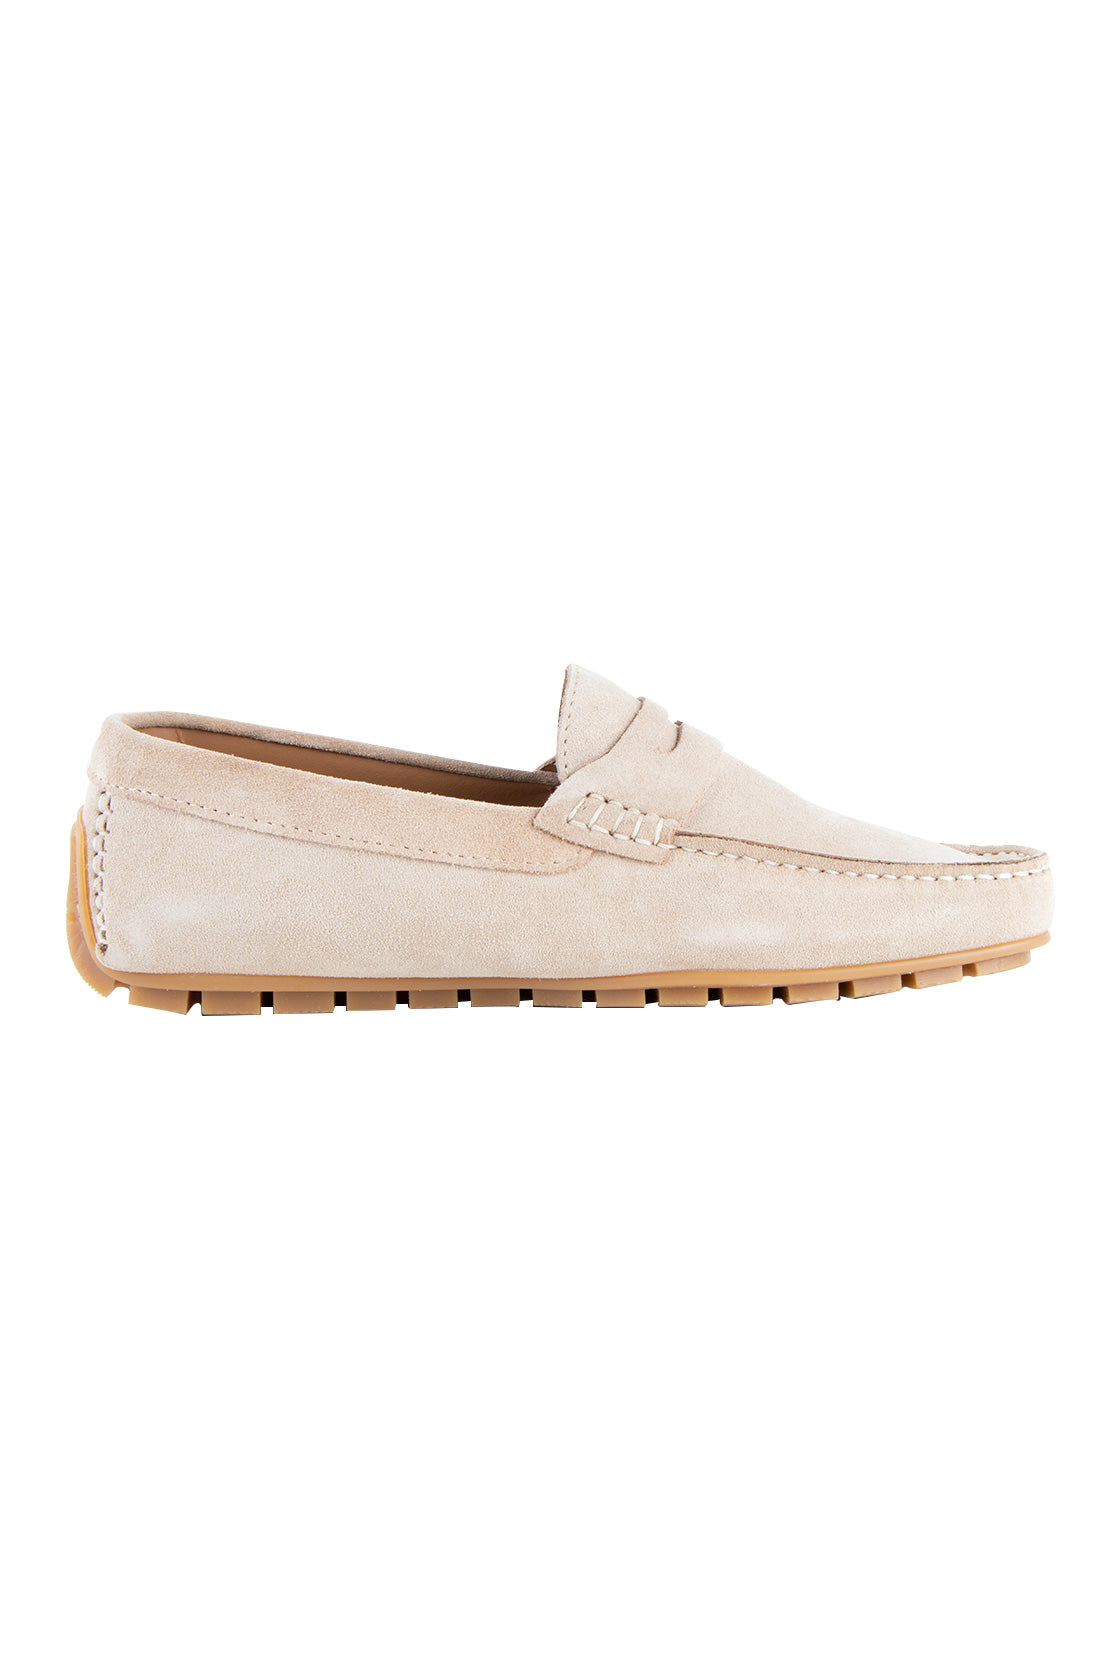 Ted Baker Allbert Suede Driving Shoes Natural